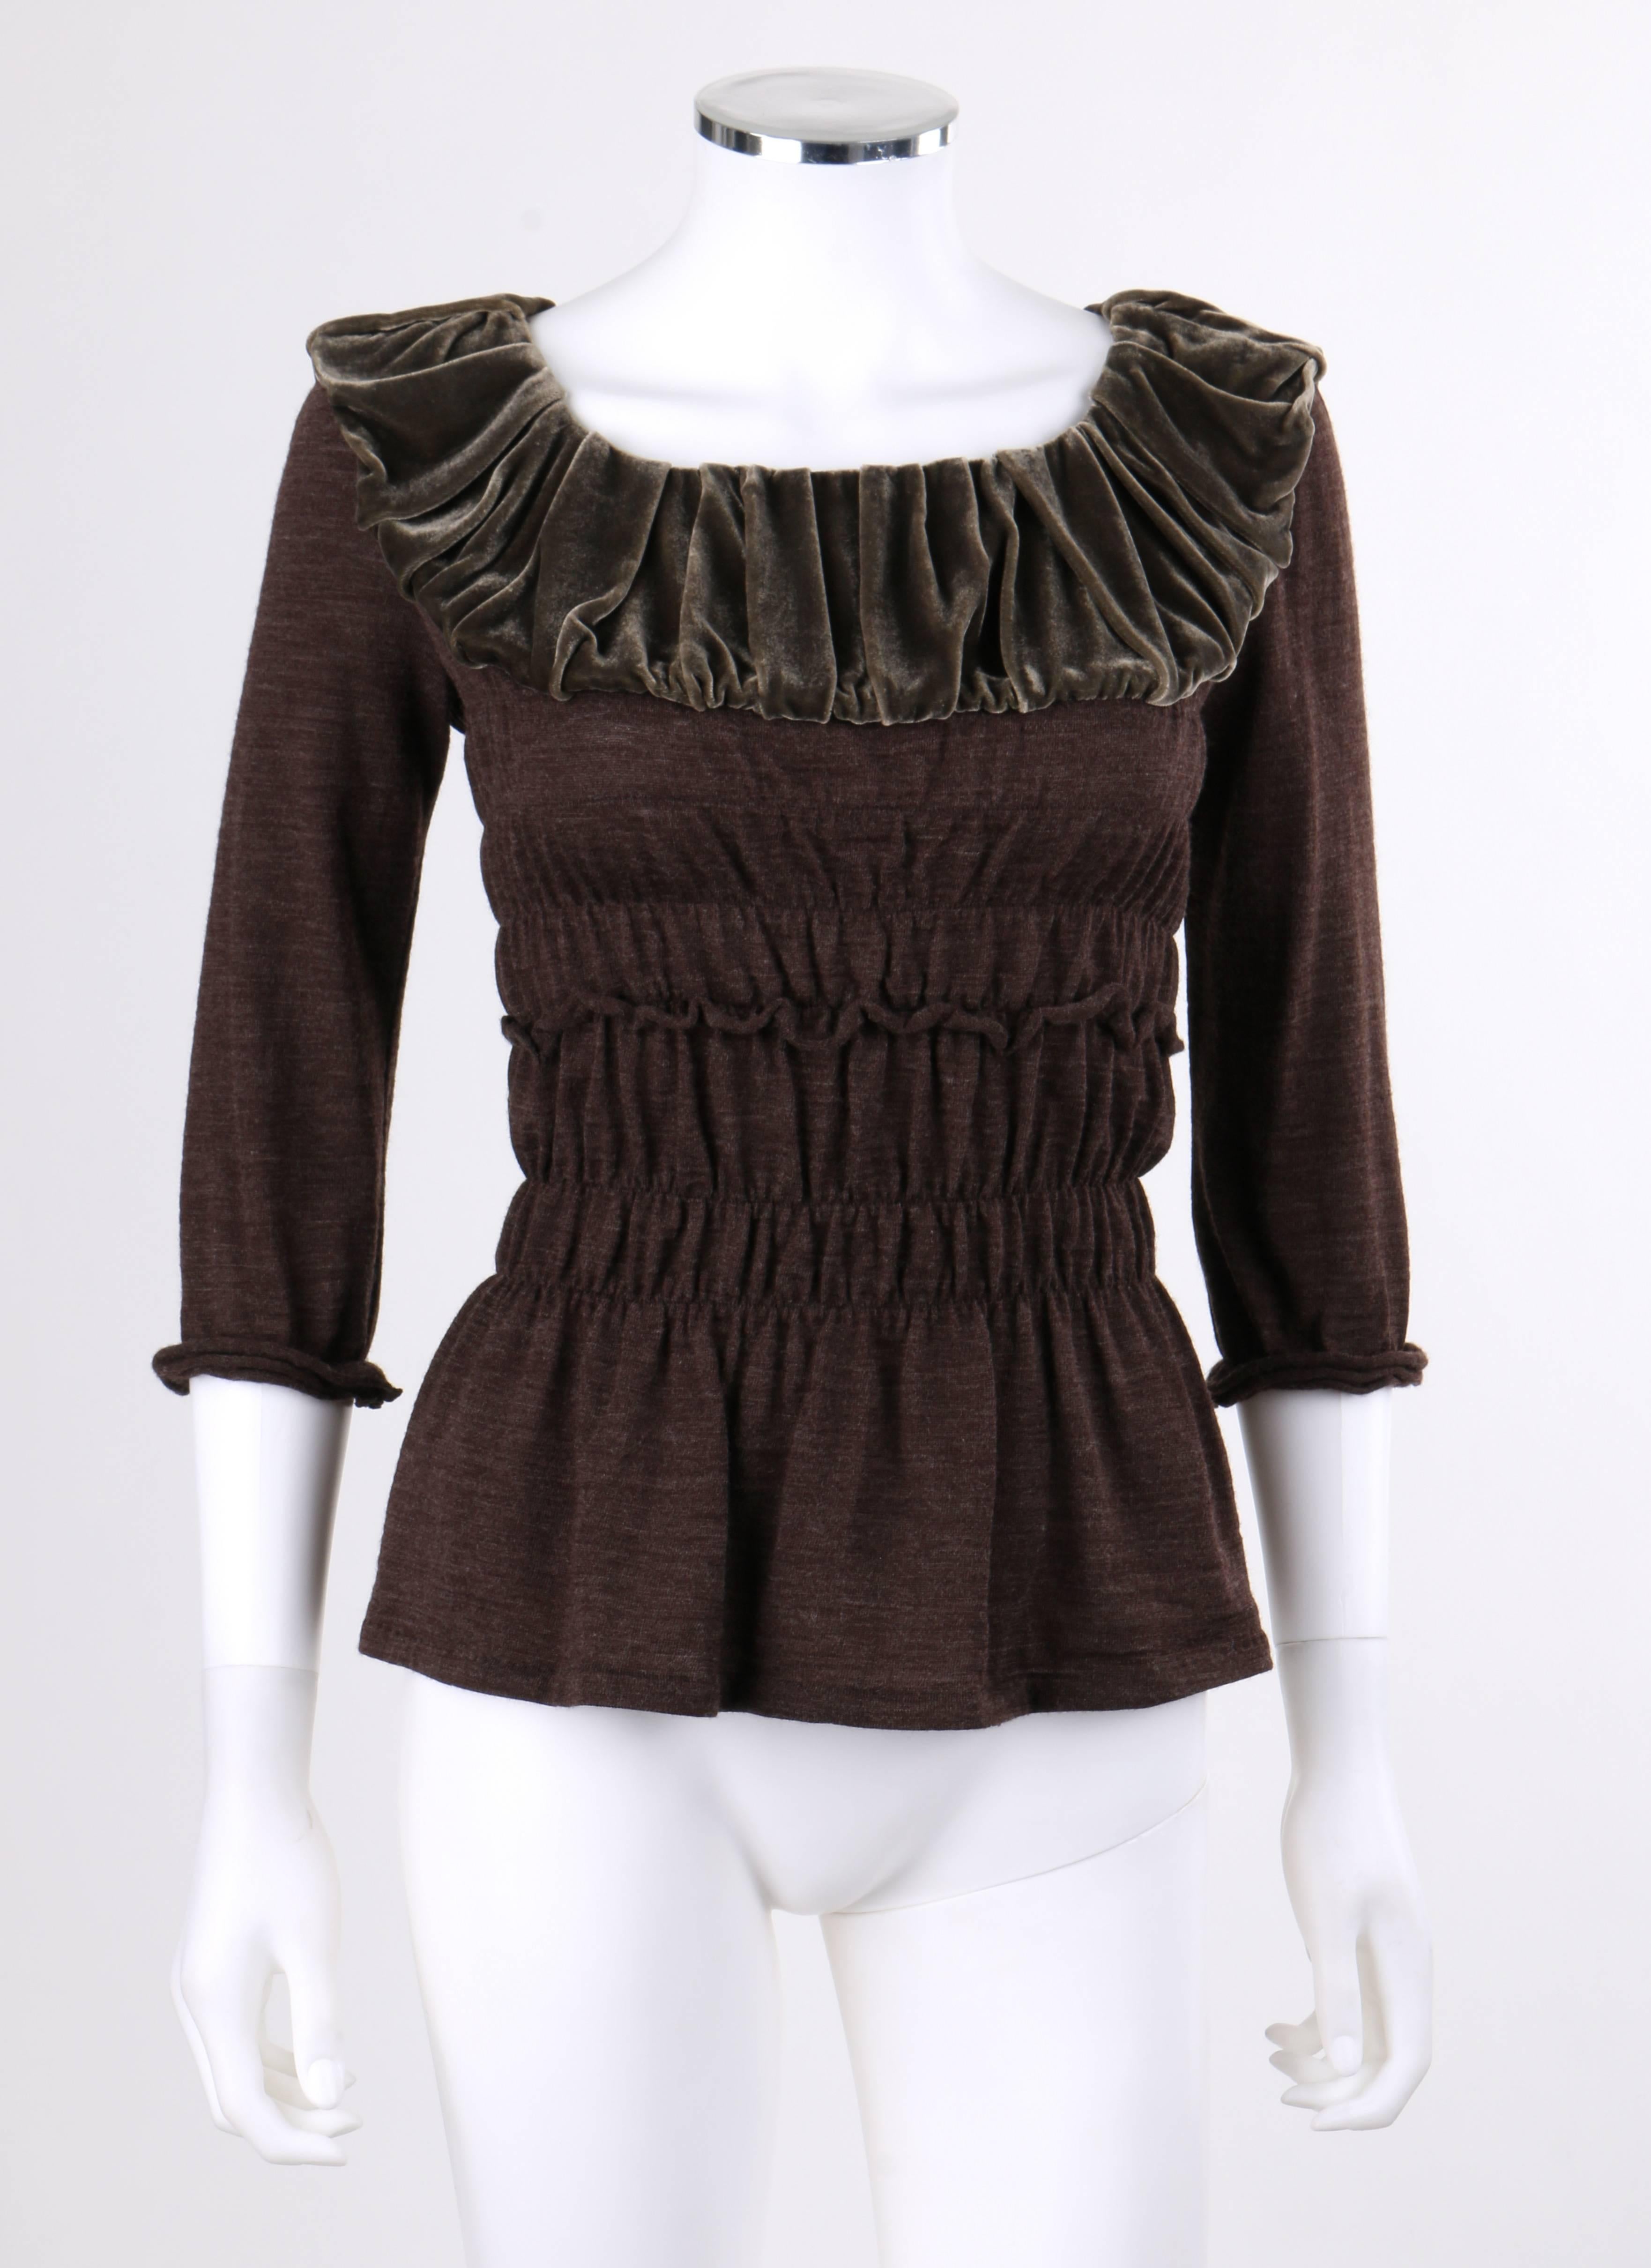 Louis Vuitton Autumn/Winter 2006 heathered brown wool knit ruched blouse. Designed by Marc Jacobs. 3/4 sleeves with short gathered layered cuffs. Bateau neckline. Moss green box pleated velvet faux bertha inset collar. Ruched mid-section from under